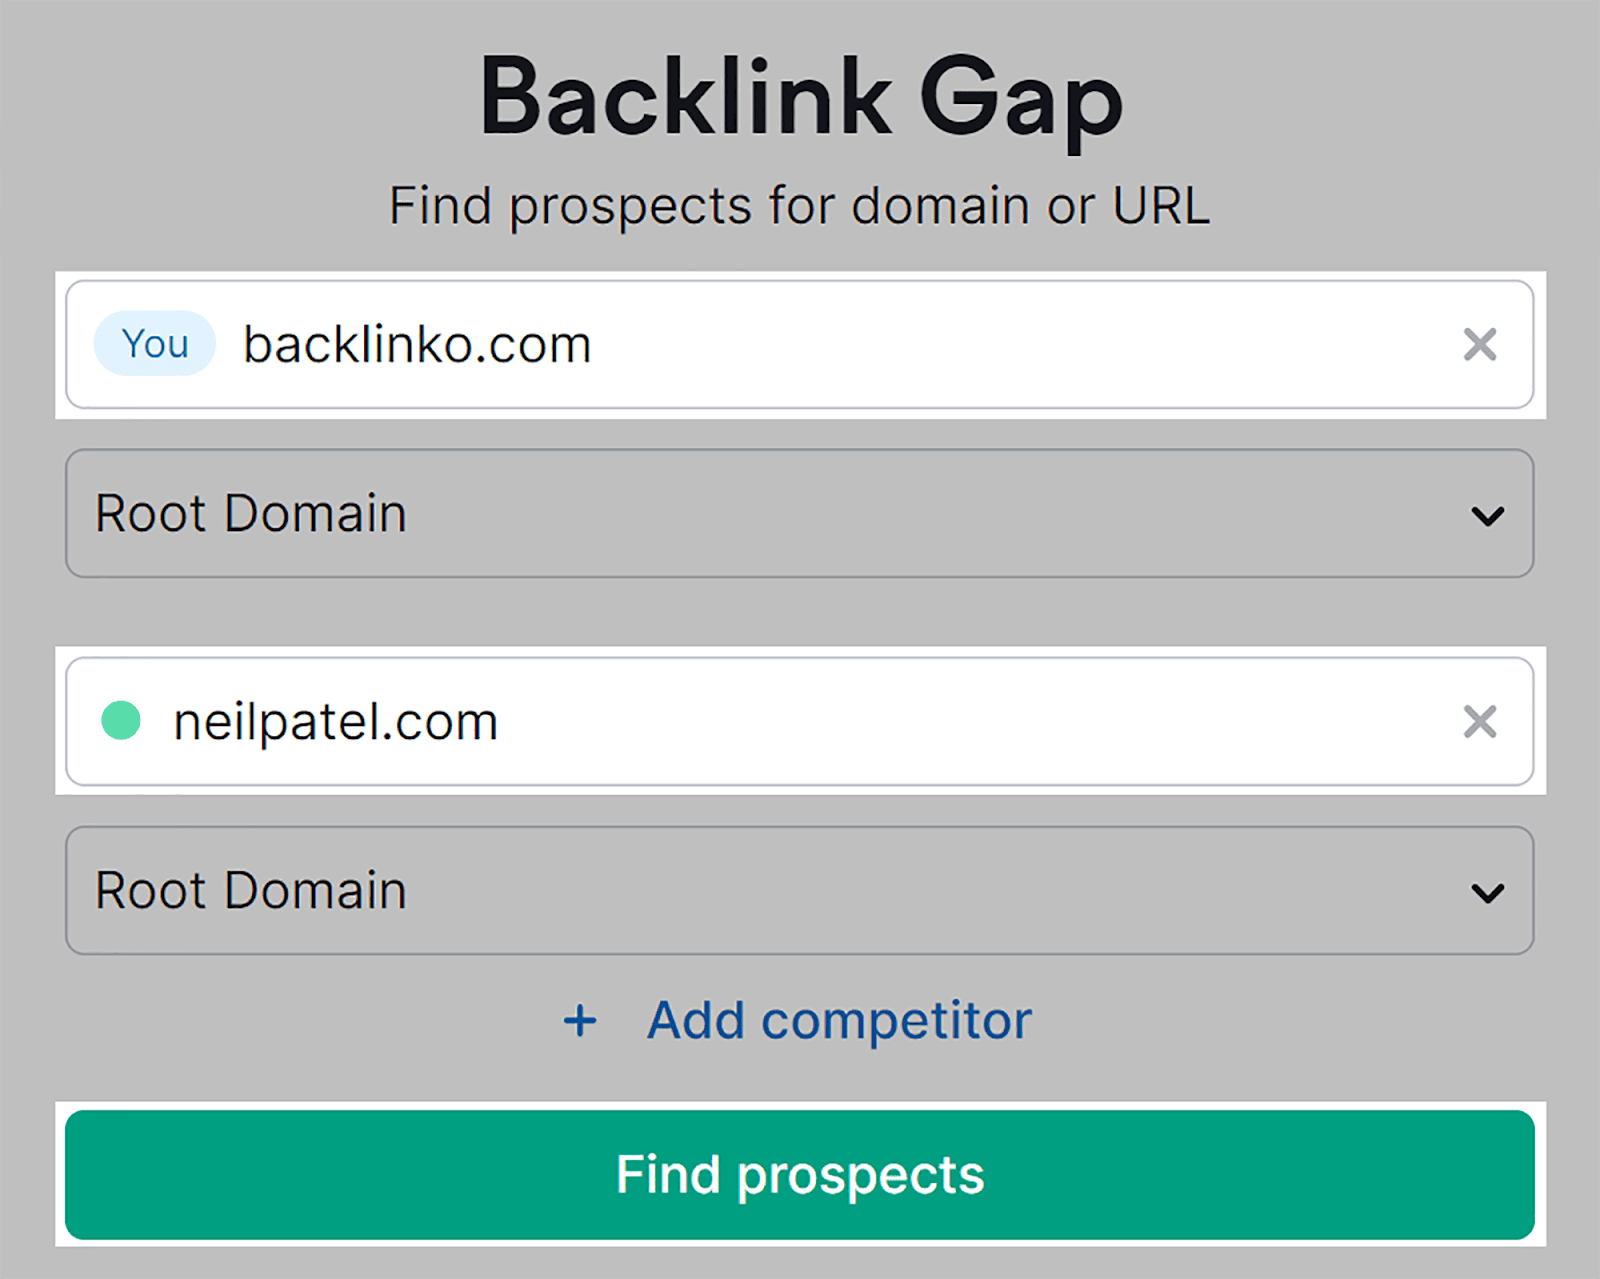 Add your domain & competitor then click 'Find Prospects'